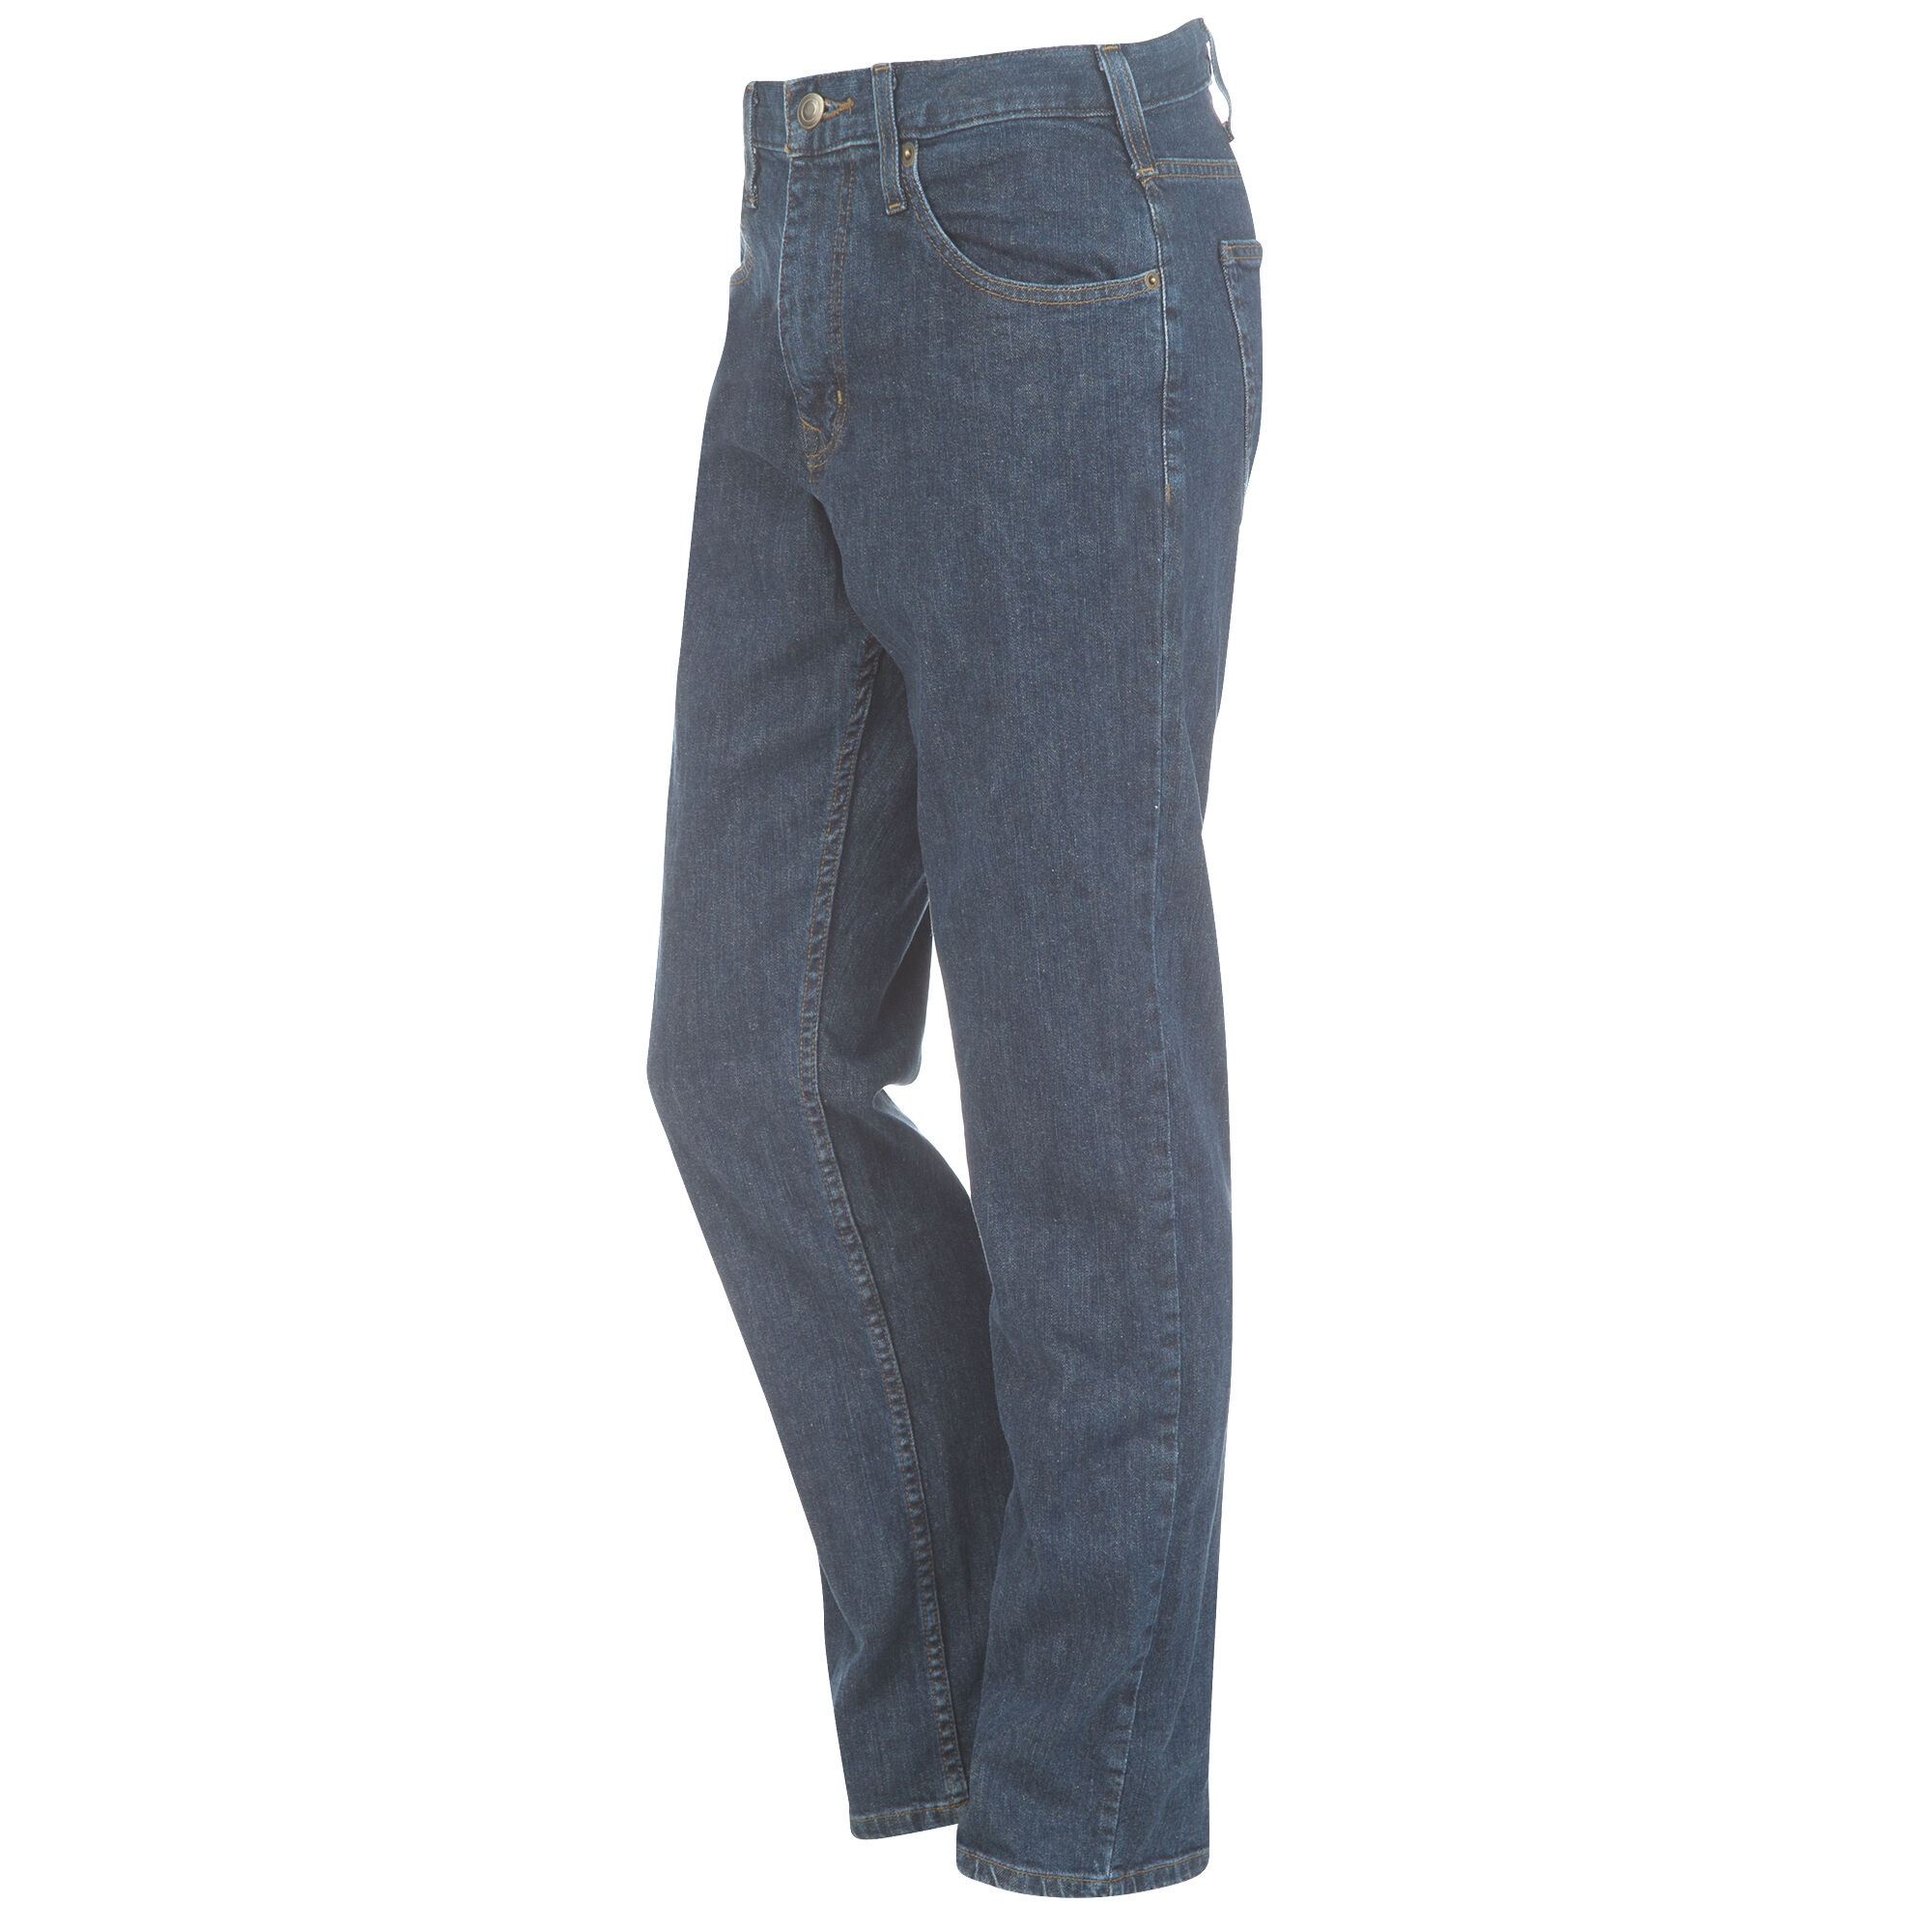 outdoor life relaxed fit jeans